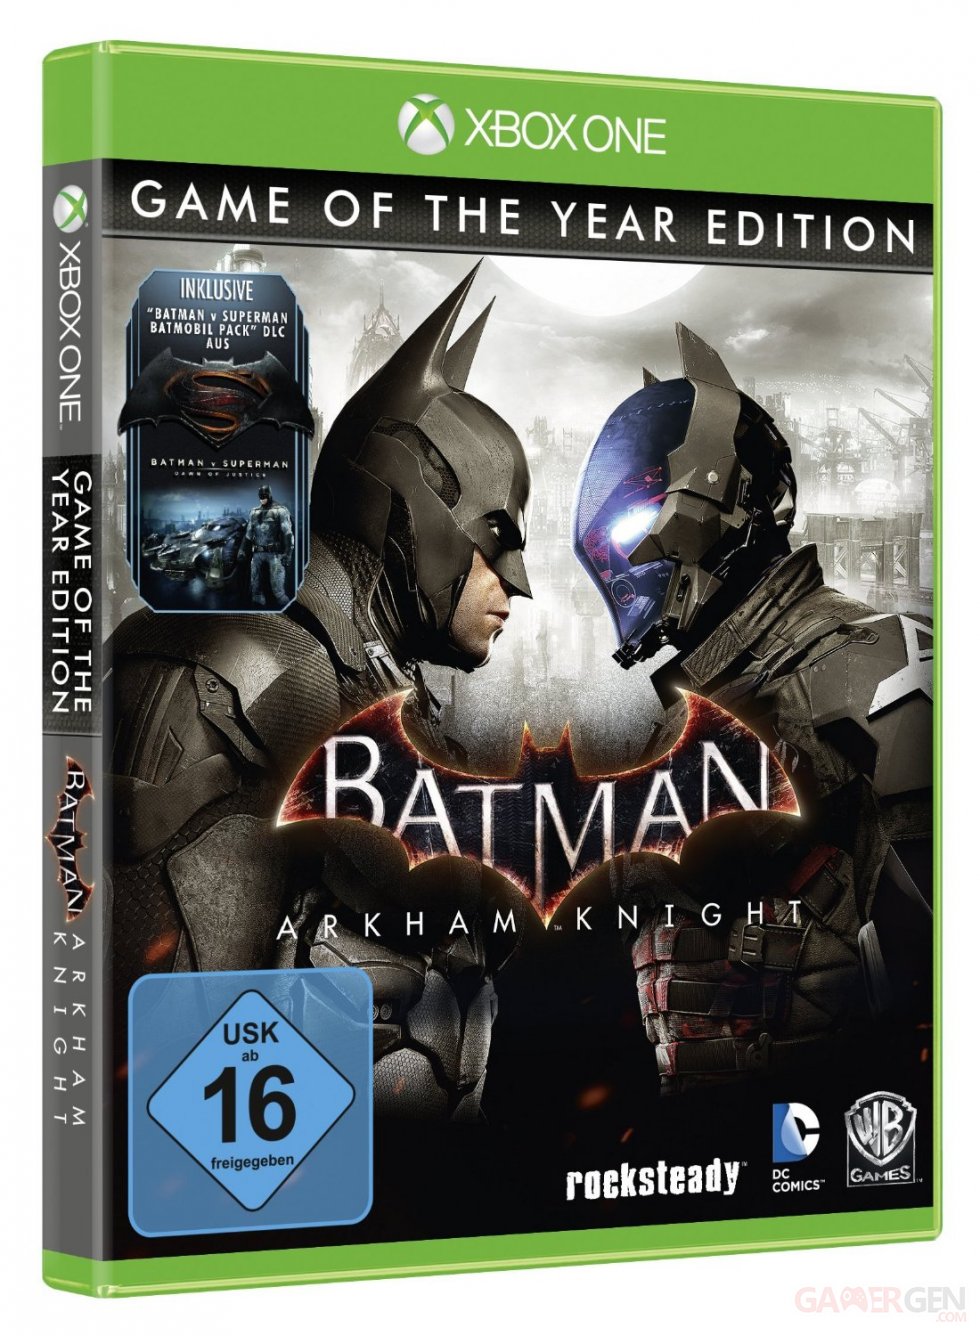 Batman Arkham Knight Jaquette Cover Game of the Year Edition GOTY Xbox One